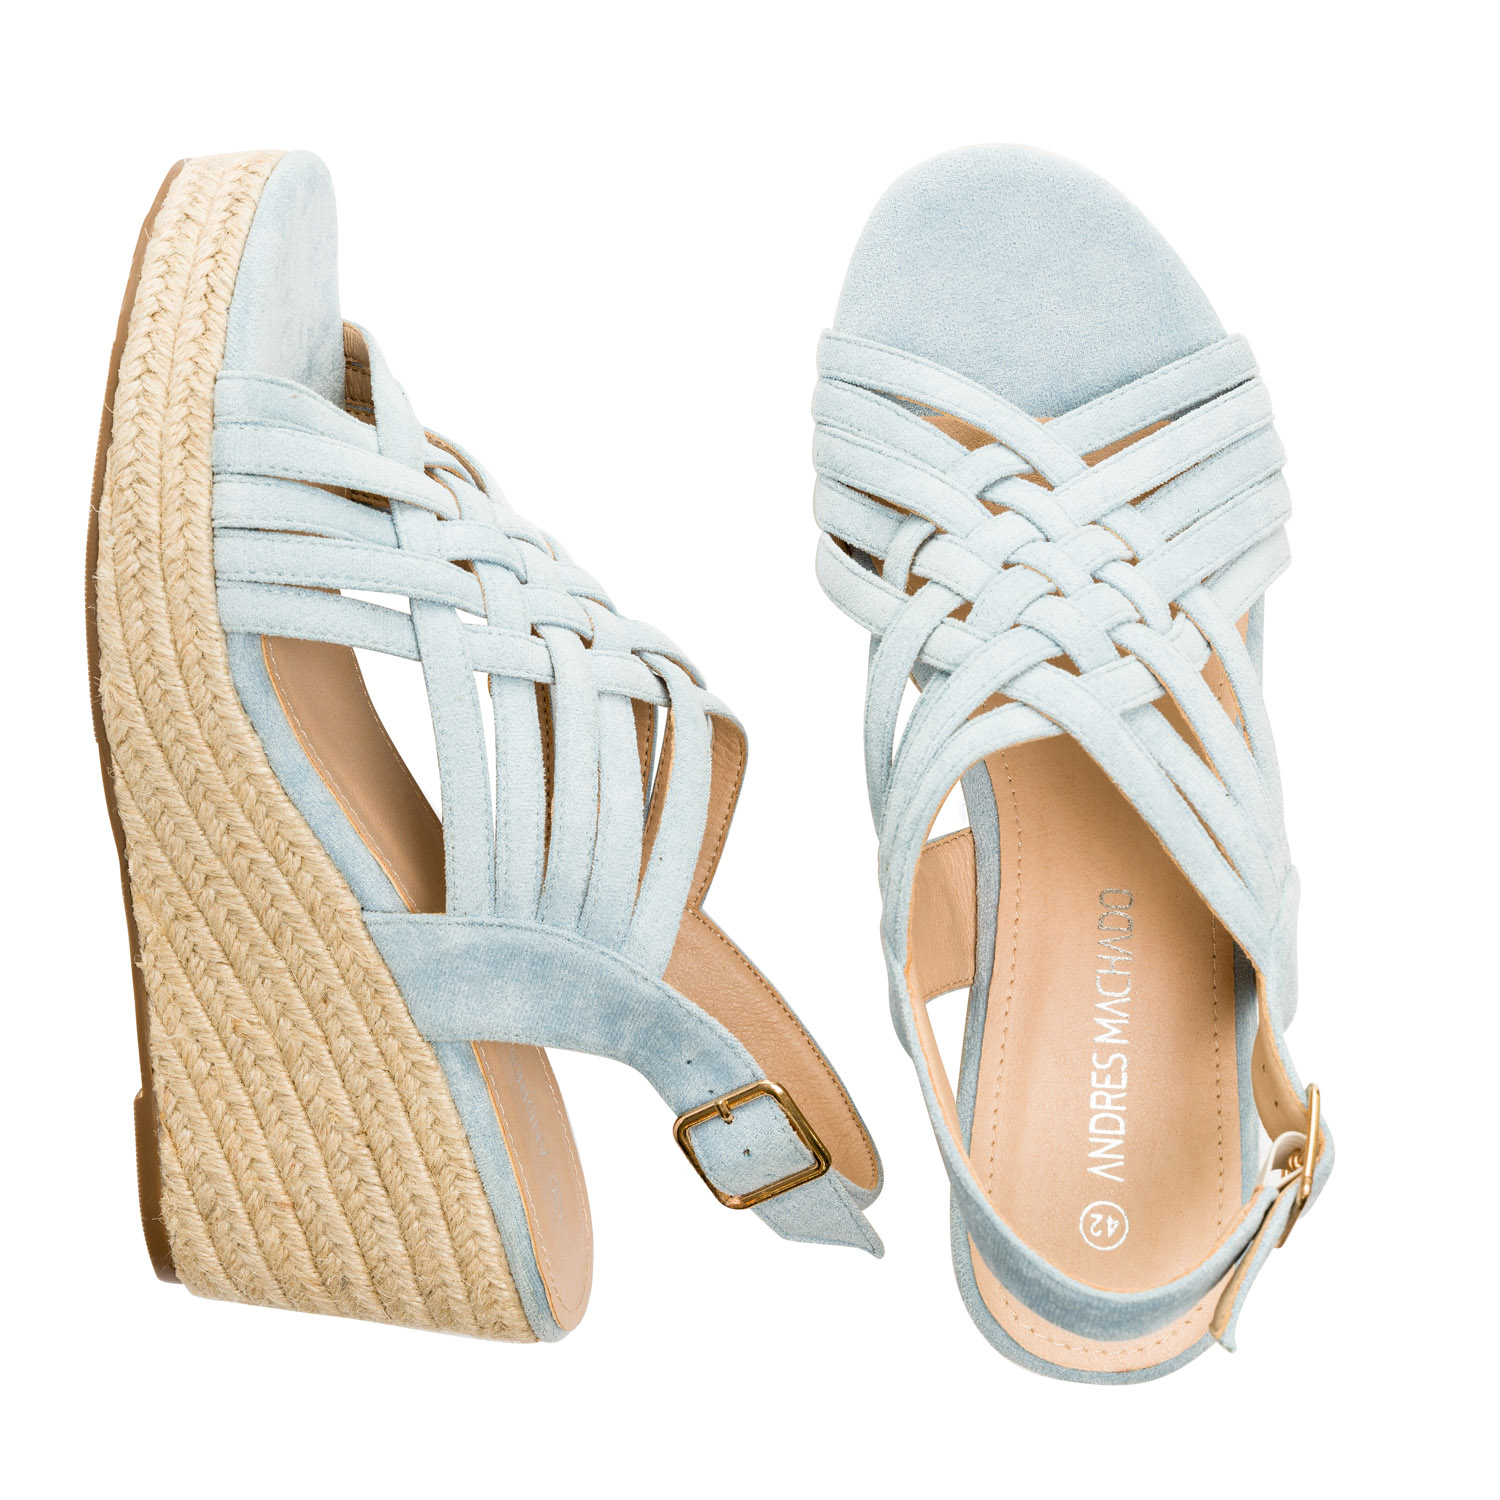 Light blue faux suede espadrilles with jute wedge 